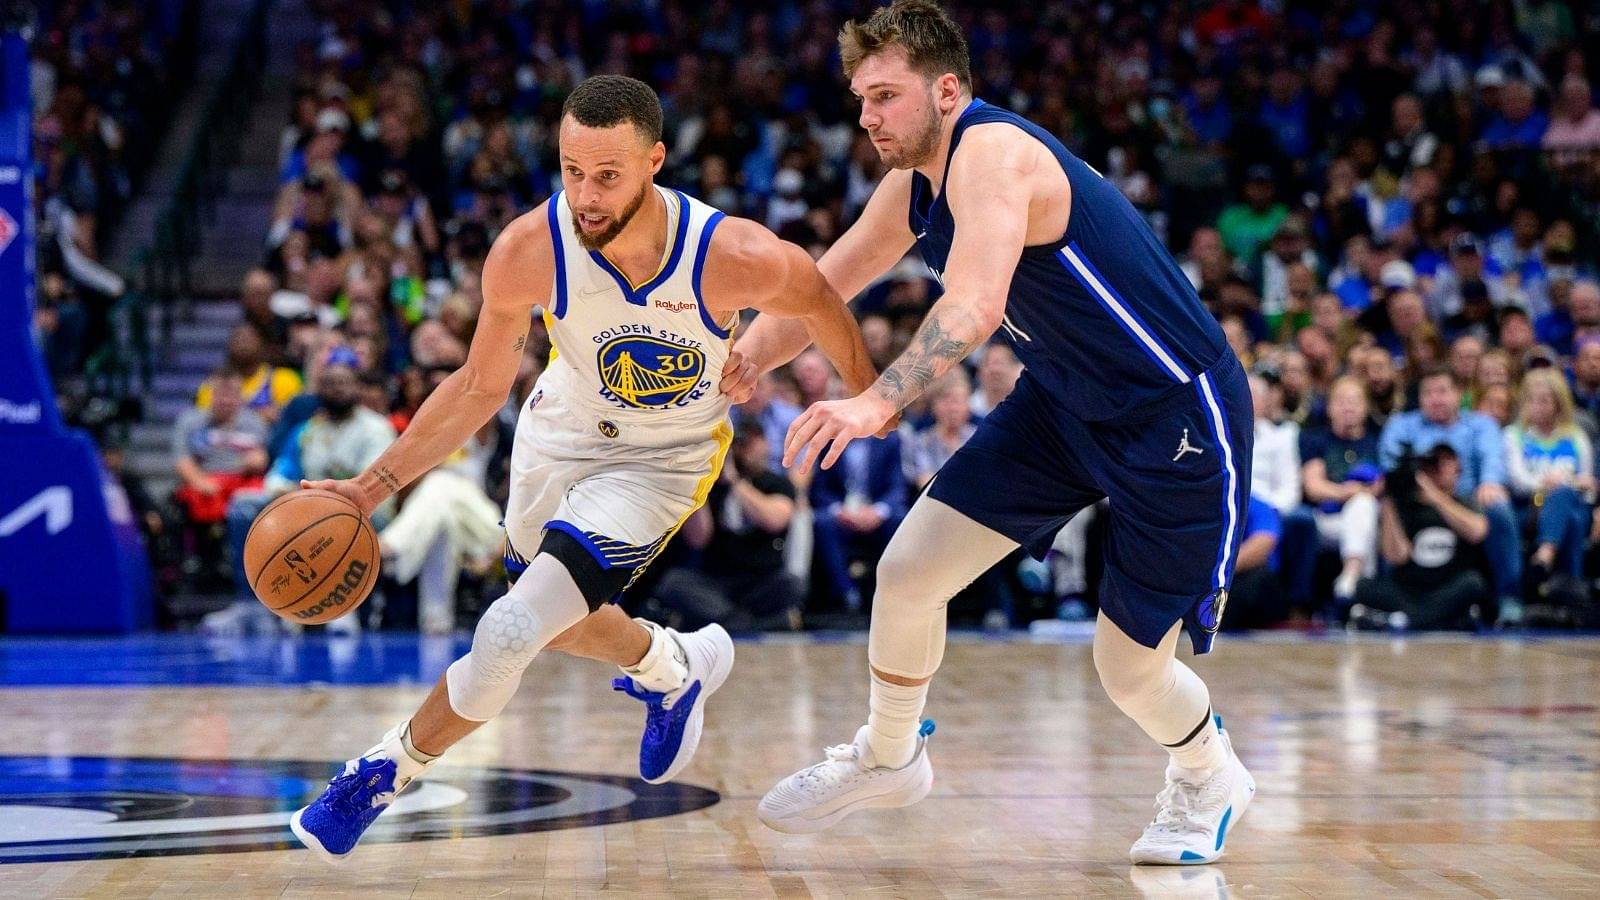 "Steph Curry heard all the Luka Doncic praise and he took it PERSONAL": Kendrick Perkins backpedals on his favorites in Warriors - Mavs series and gets torched by Dub Nation